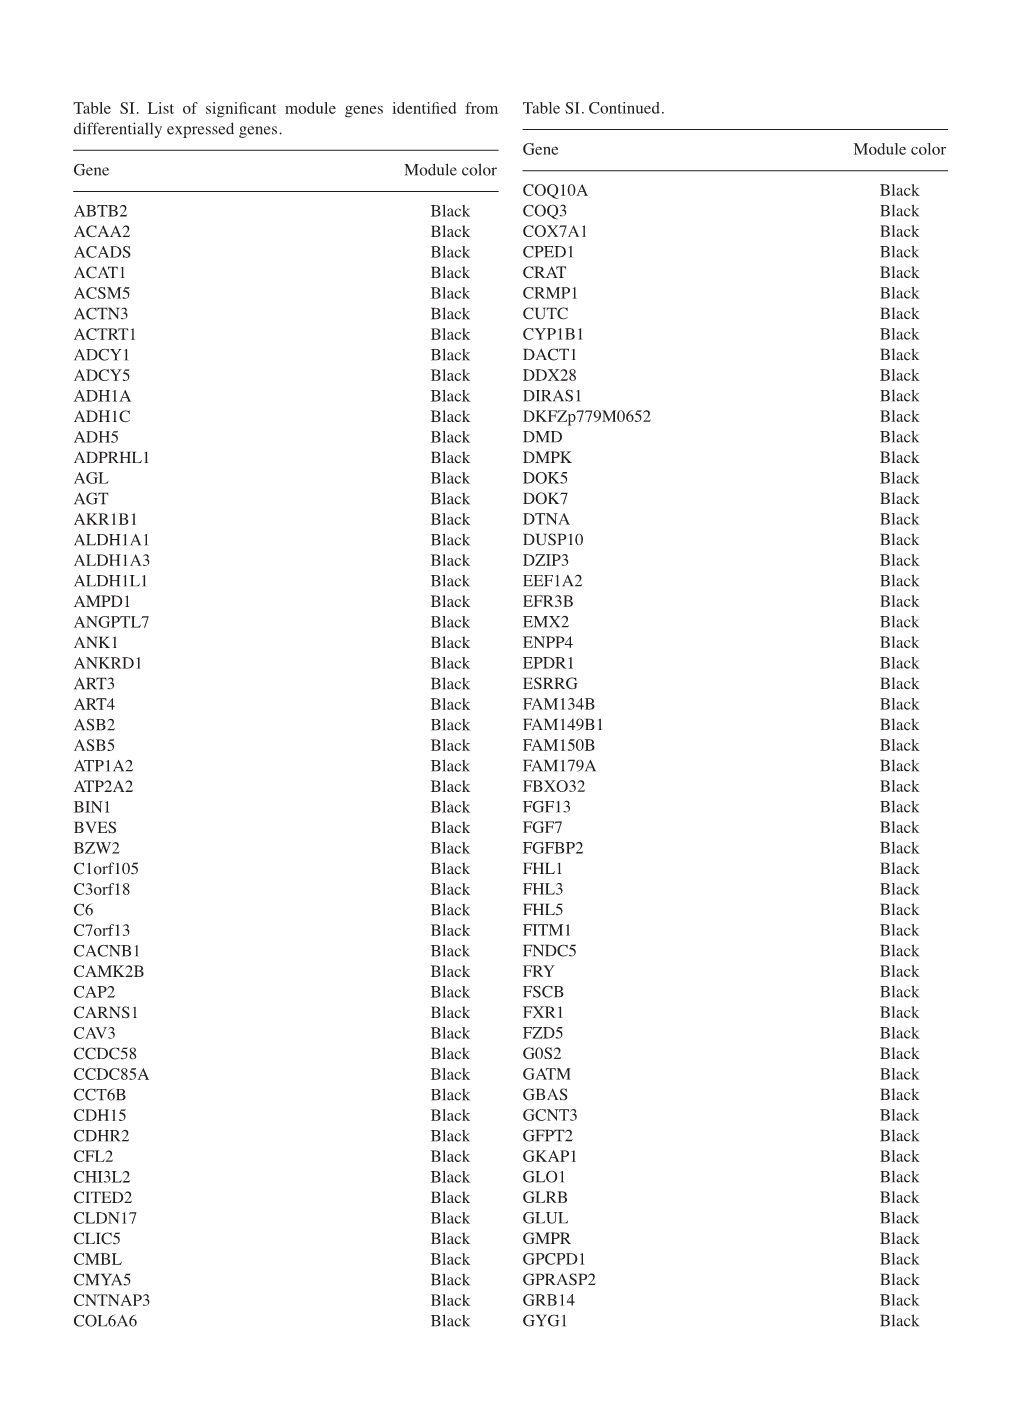 Table SI. List of Significant Module Genes Identified from Differentially